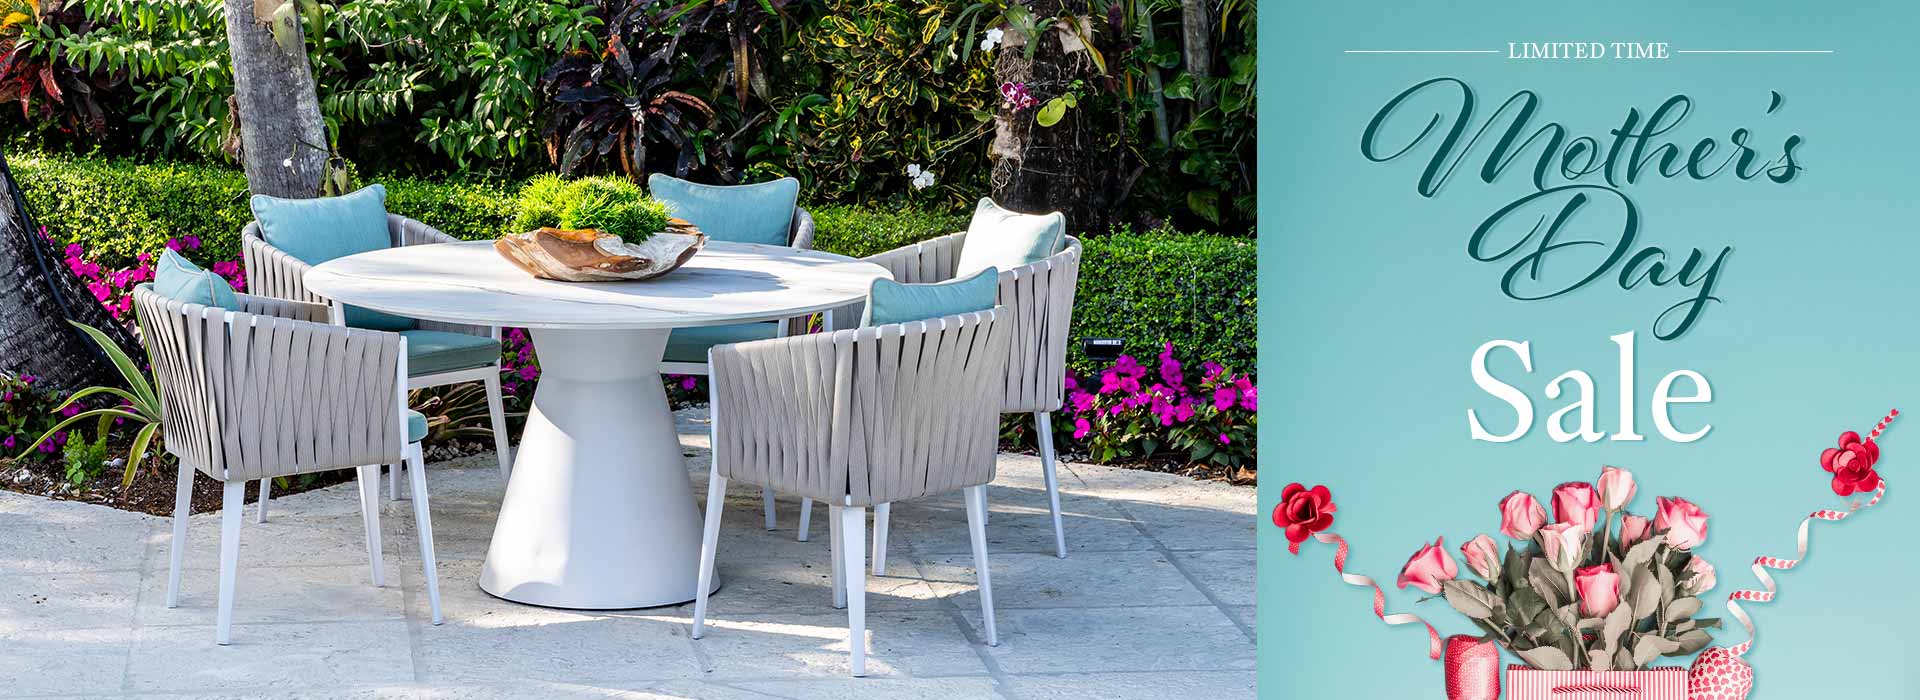 MH2G Modern Furniture on Sale. Special Offers with up to Sixty percent off Stunning Indoor and Outdoor Furniture